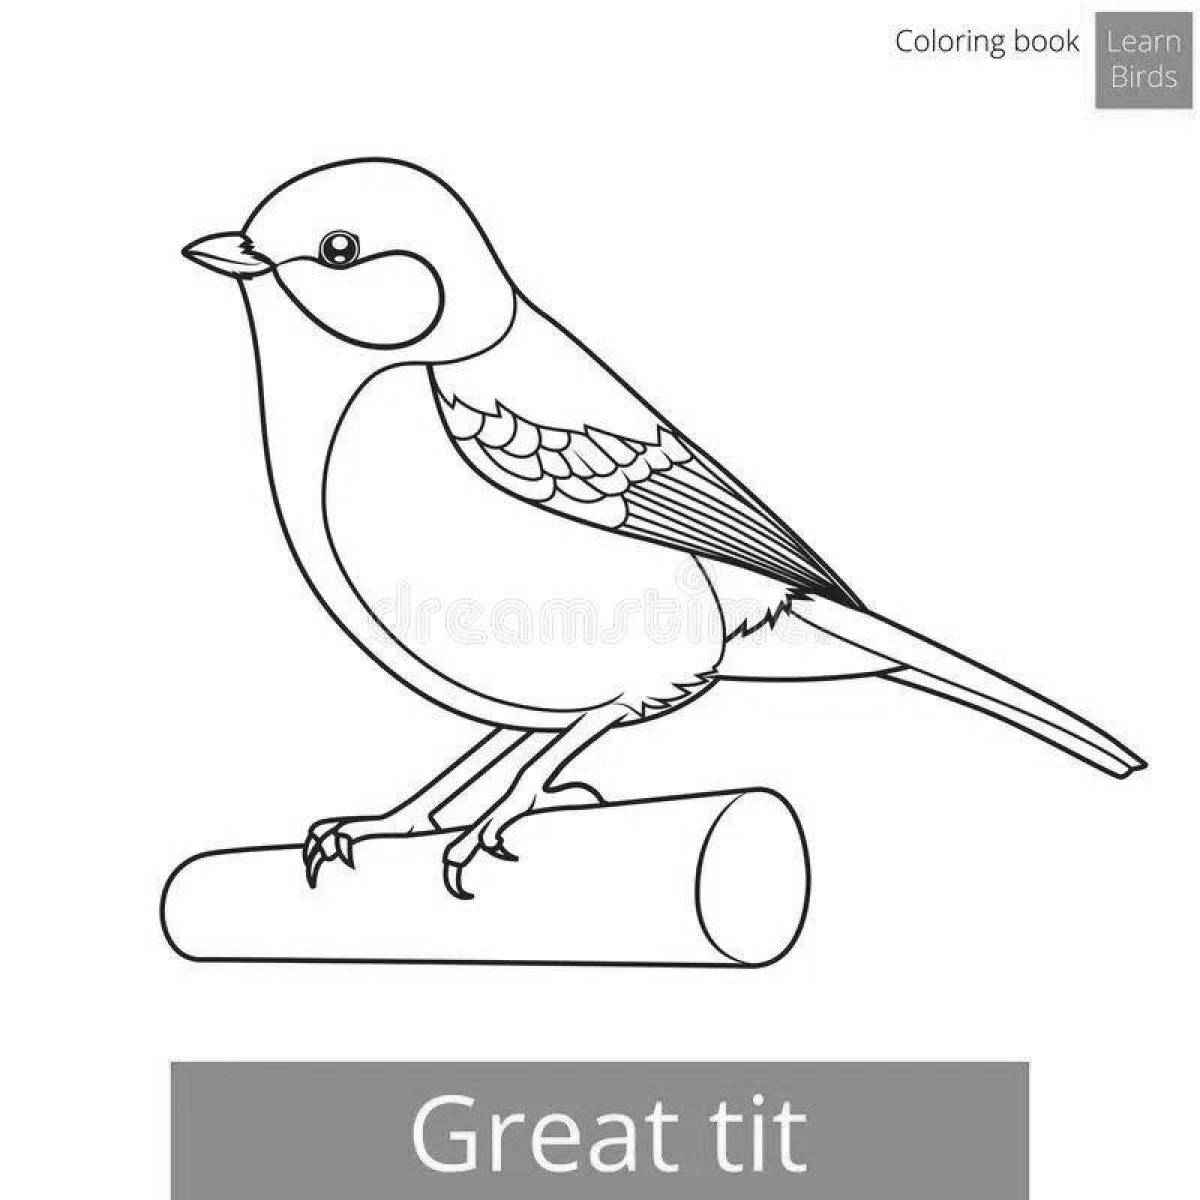 Radiant tit bird coloring page